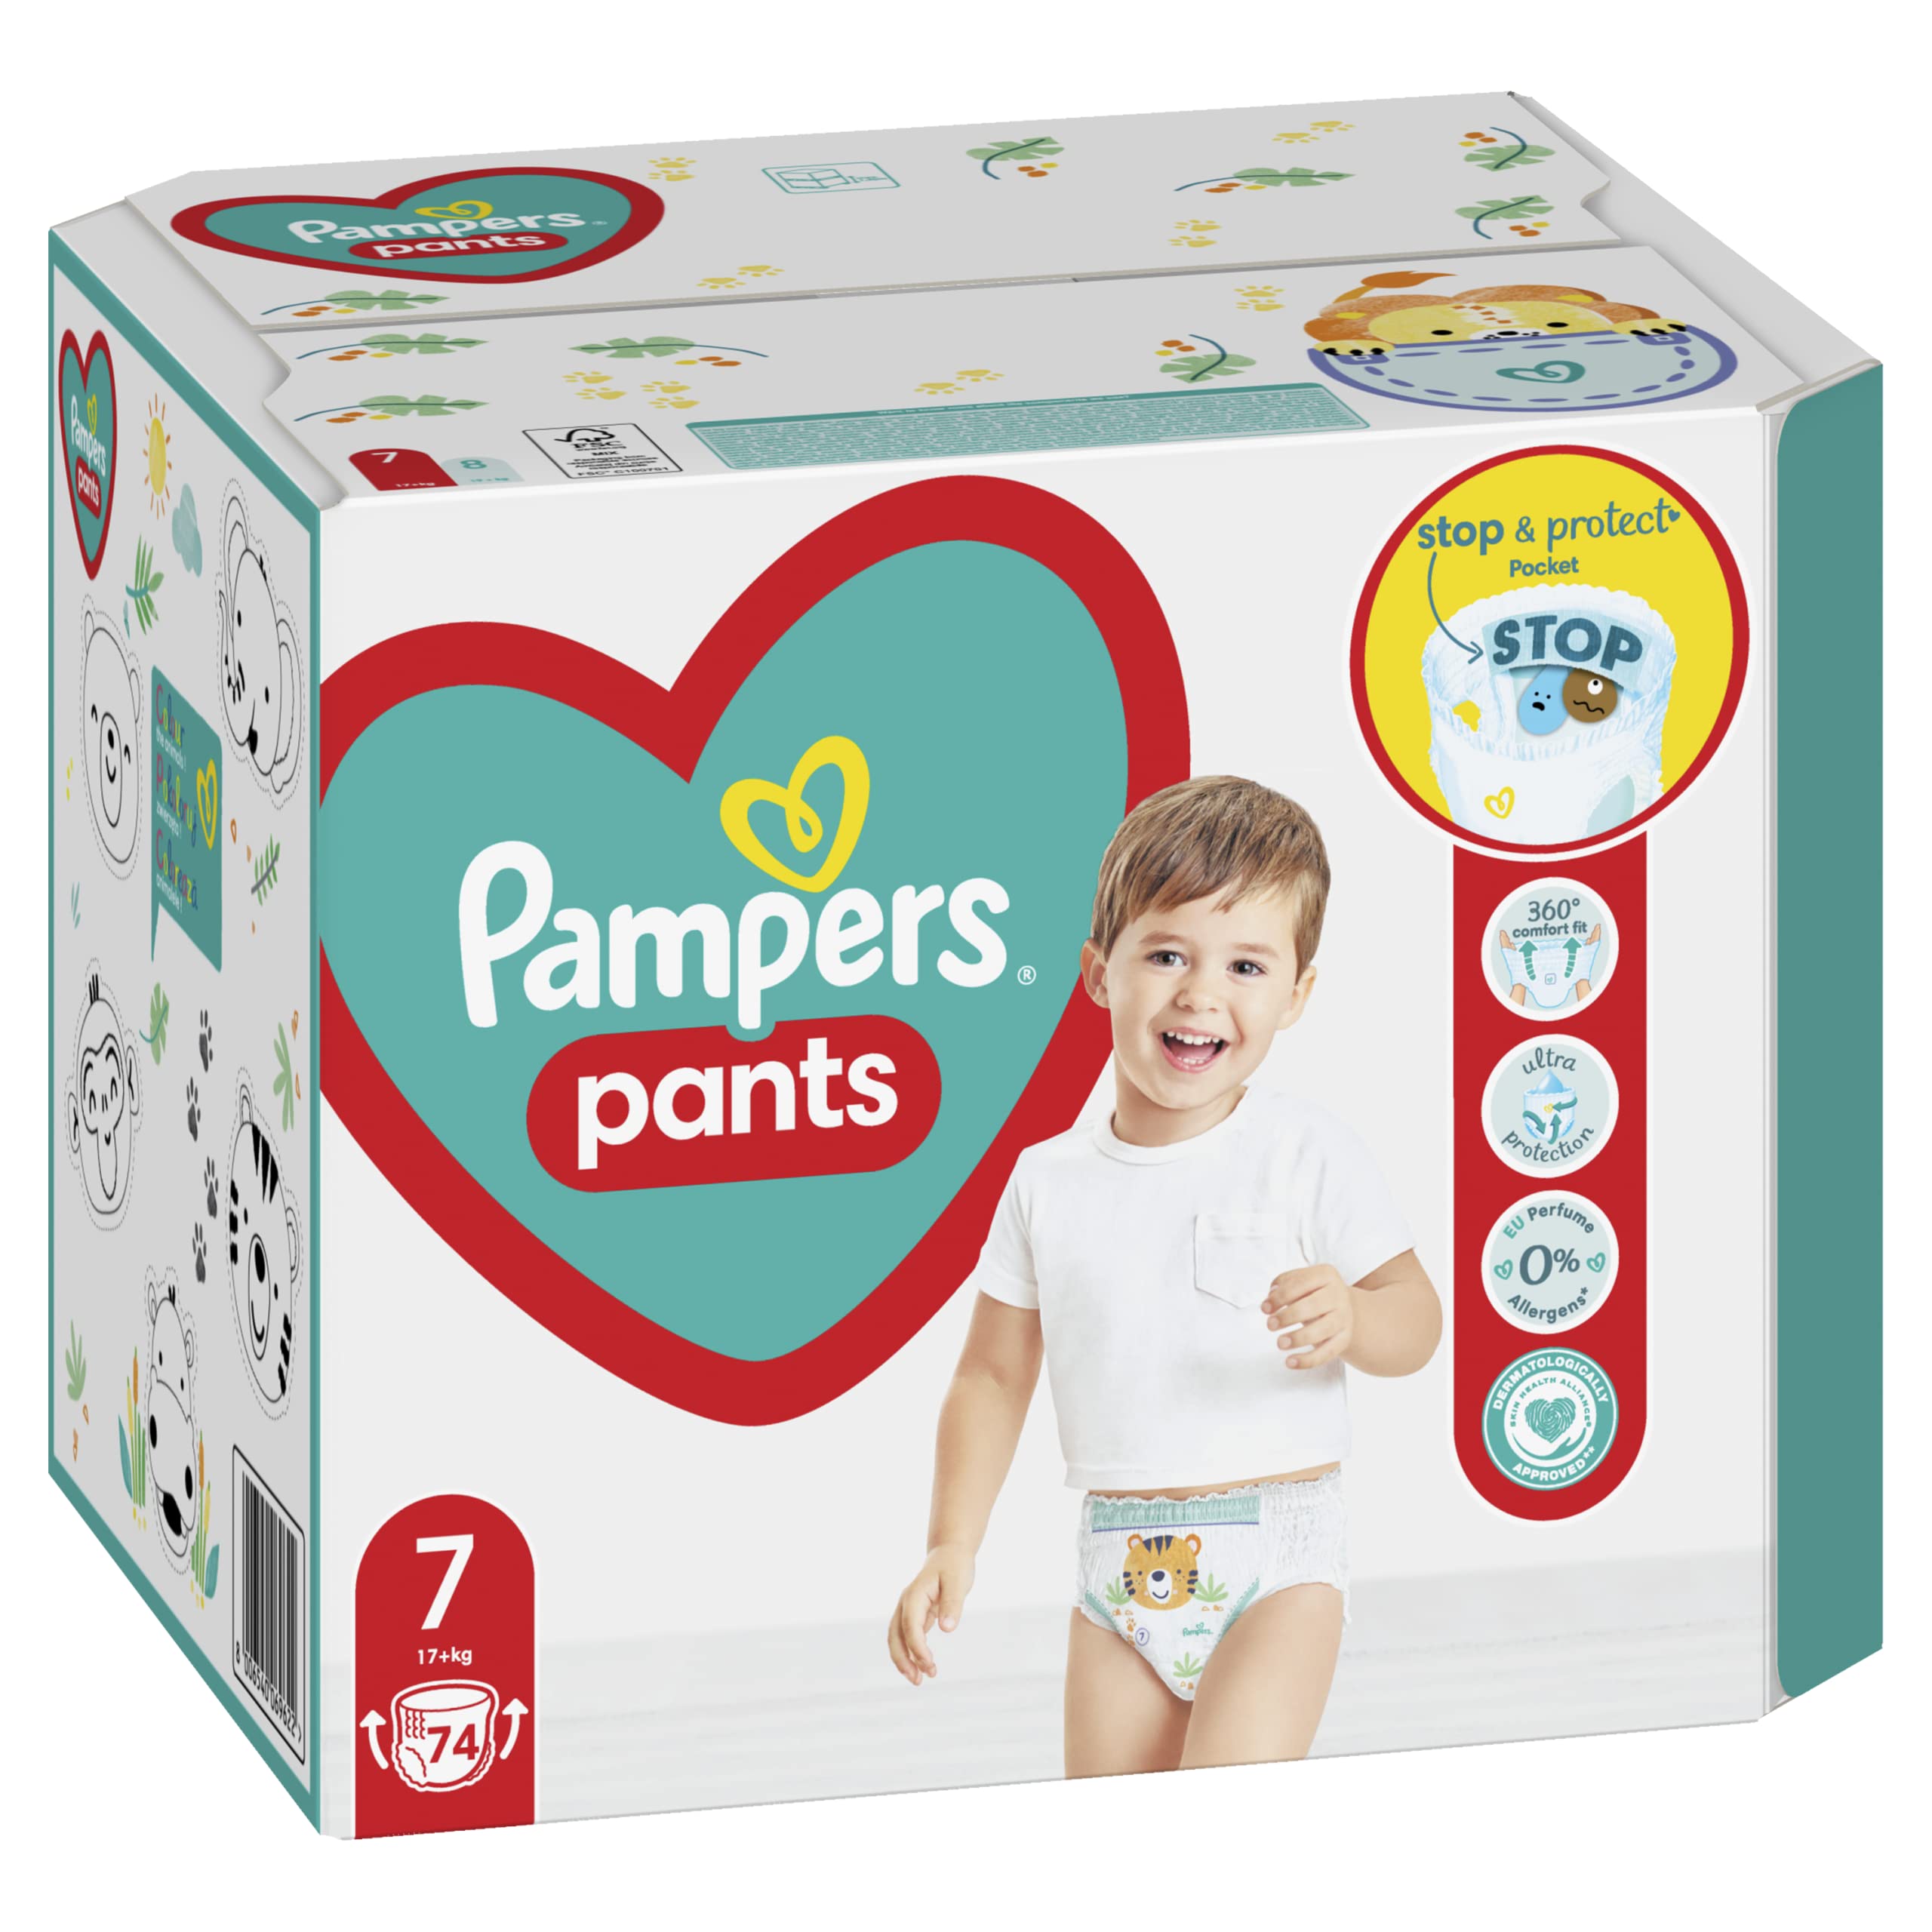 pampers acive baby 4